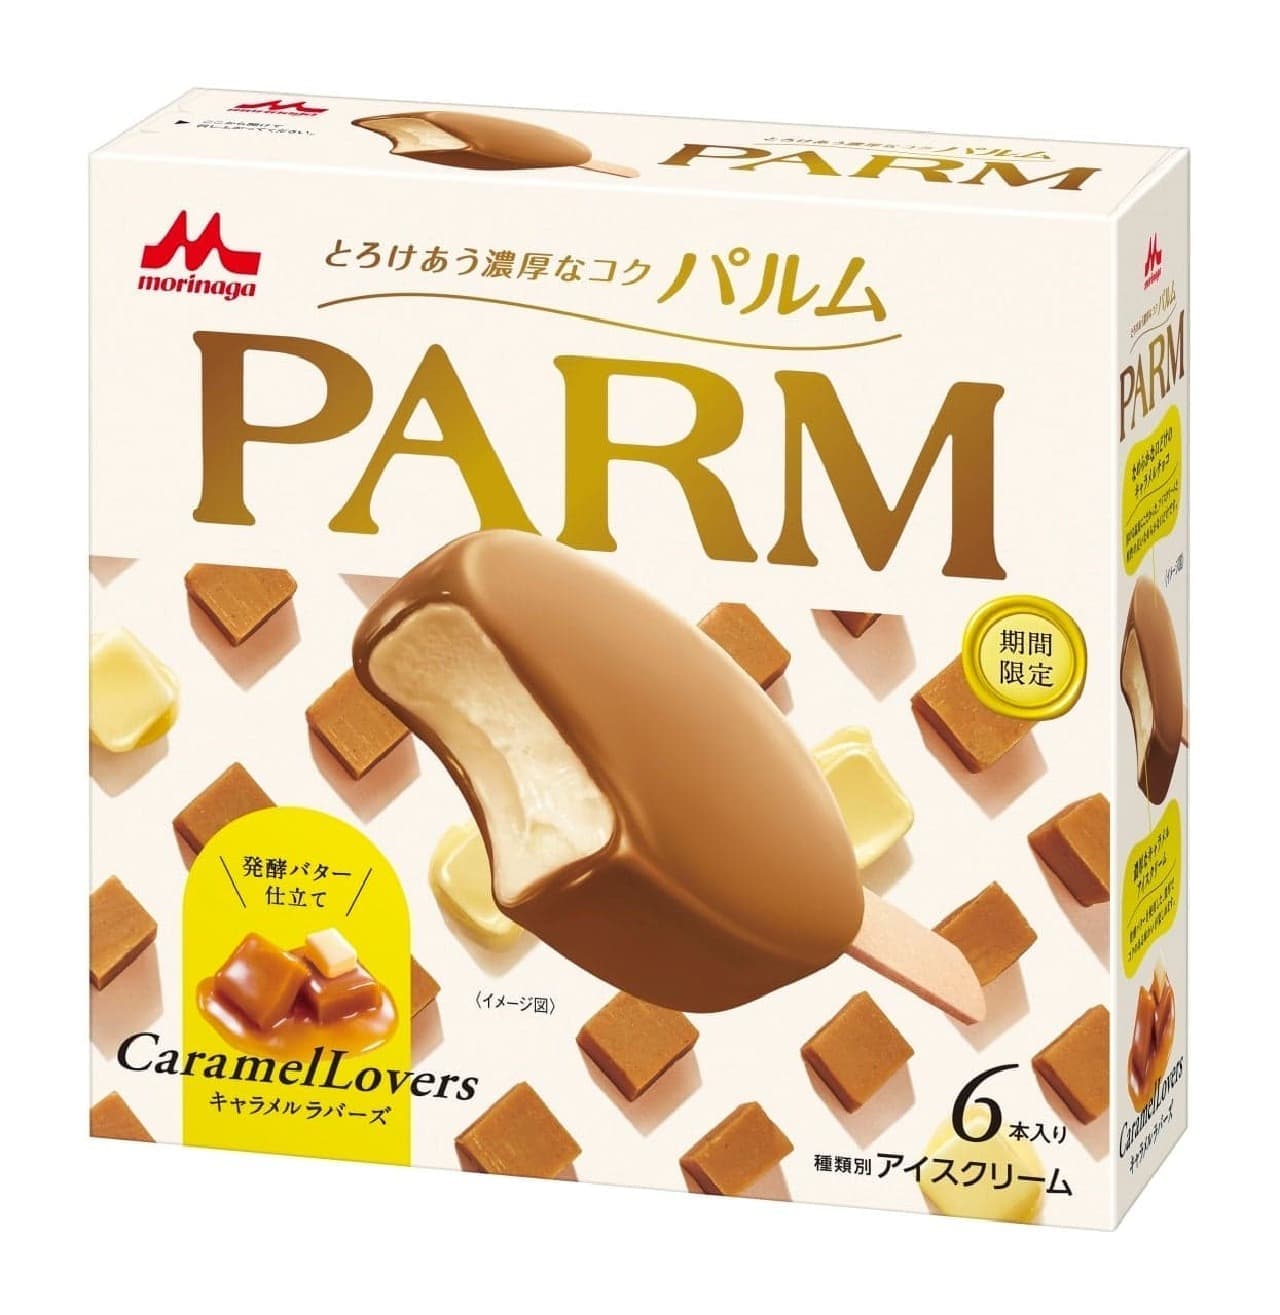 Palm Caramel Lovers (6-pack)